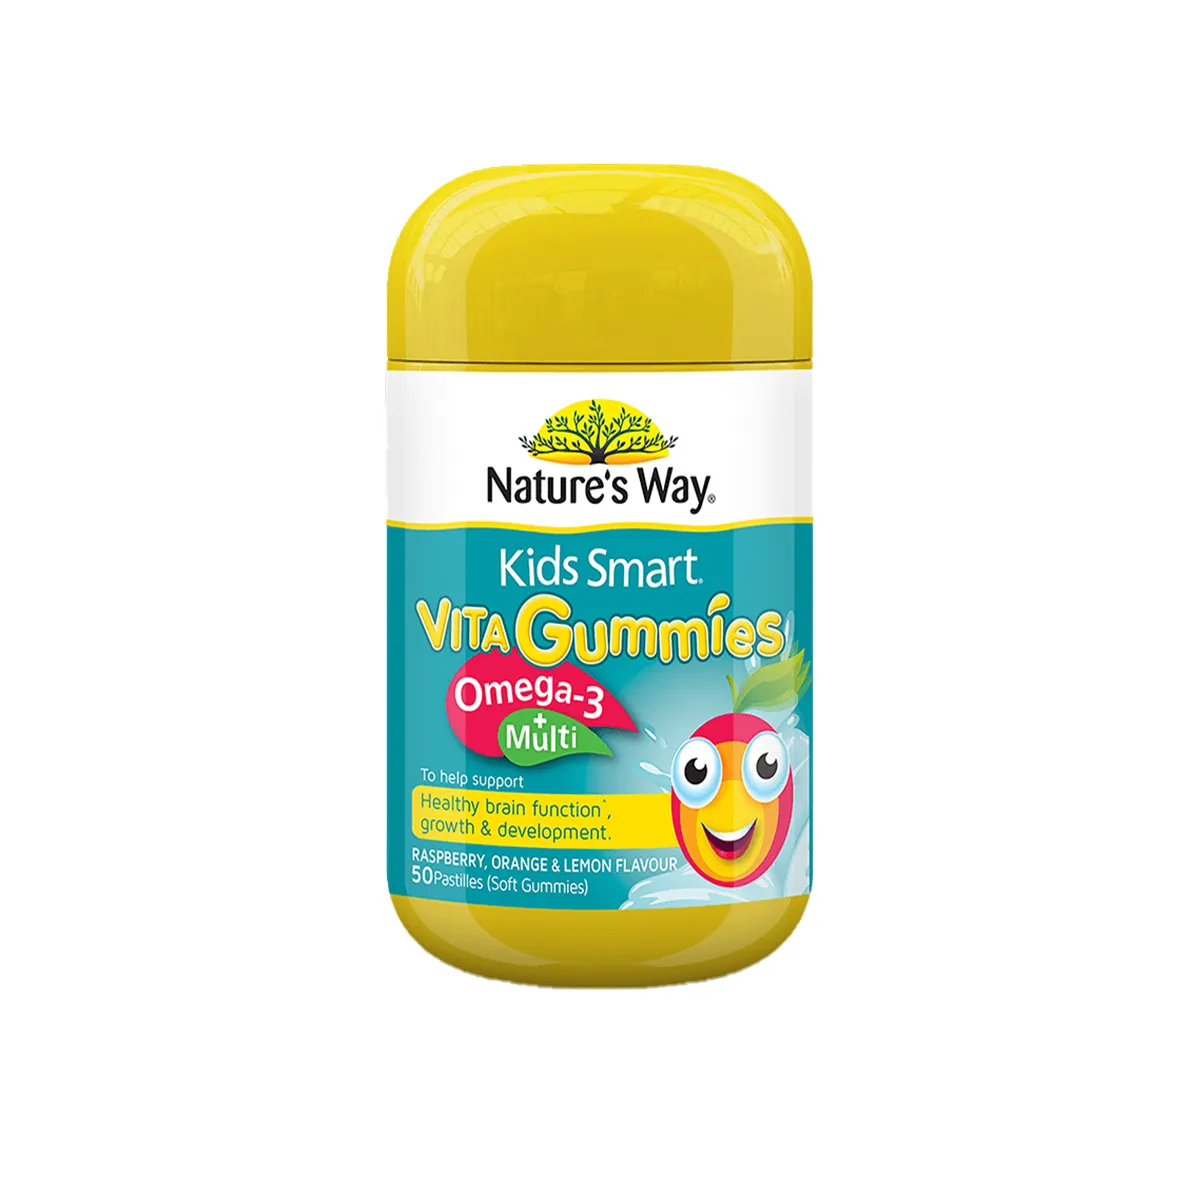 First product image of Nature’s Way Kids Smart Vita Omega-3+Multi Capsules 50s